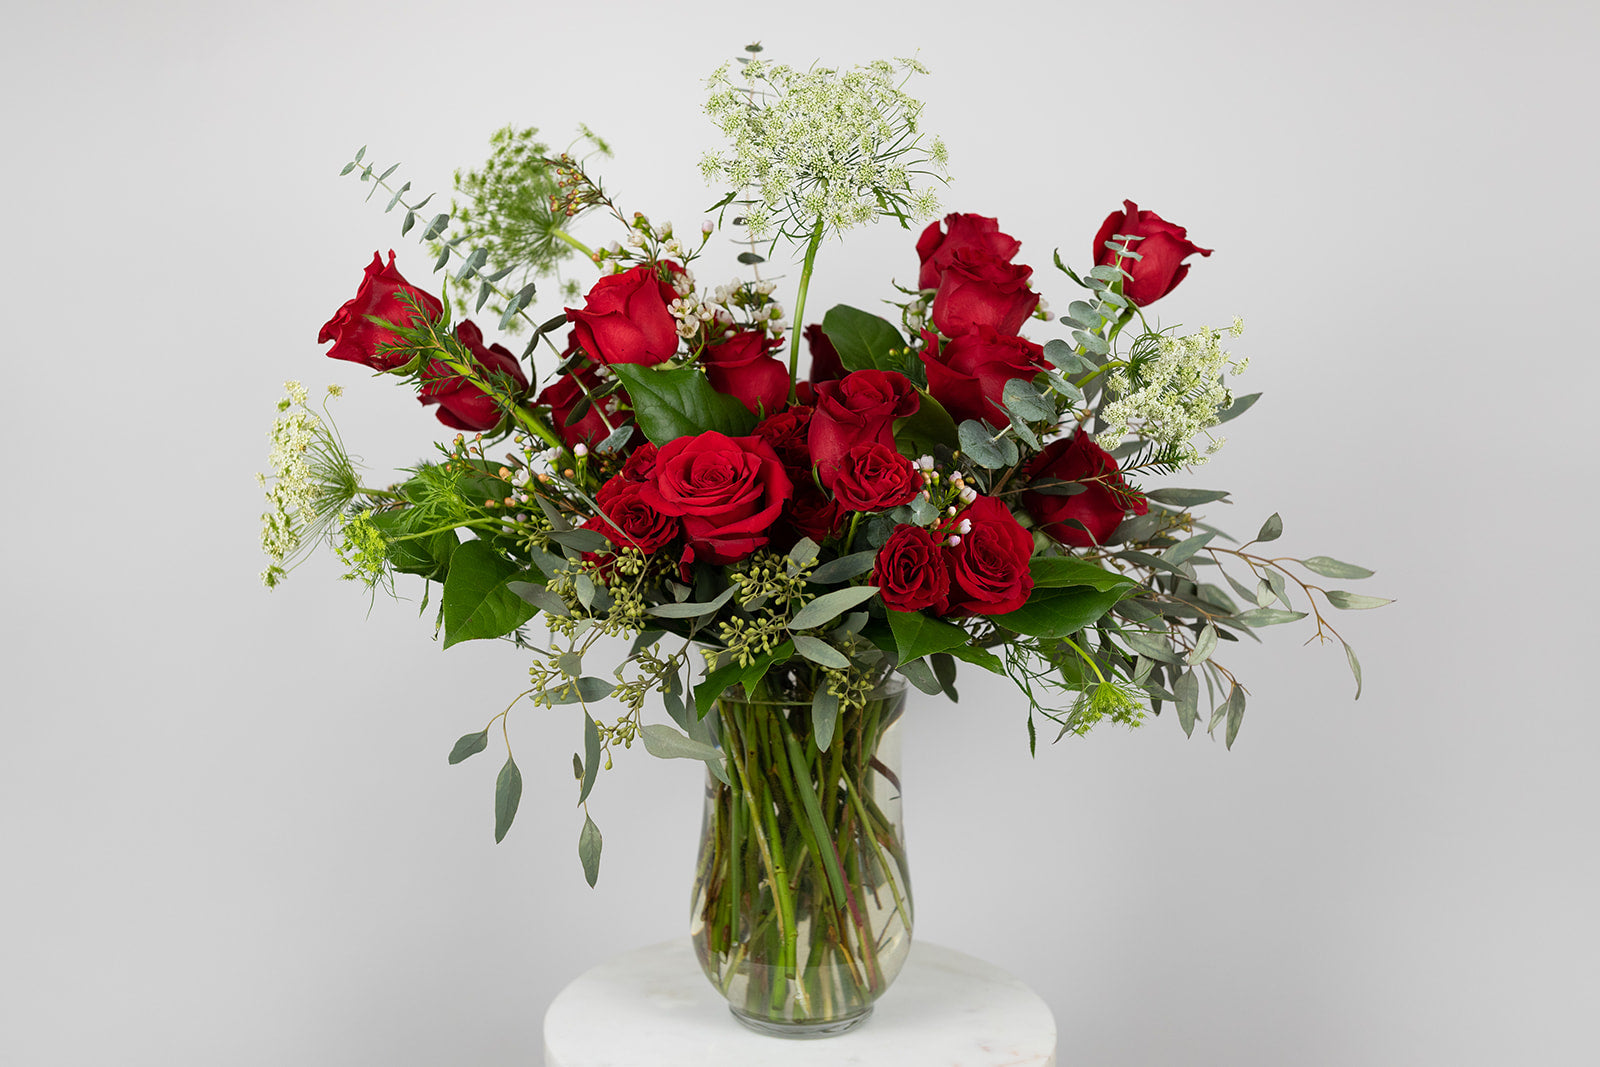 The lover is filled with extra-large red roses, red spray roses, queen anne's lace, and romantic eucalyptus greenery. Valentien's flower delivery available for same day delivery in the local Kansas City great metro area. Red rose arrangement for Valentine's Day. 